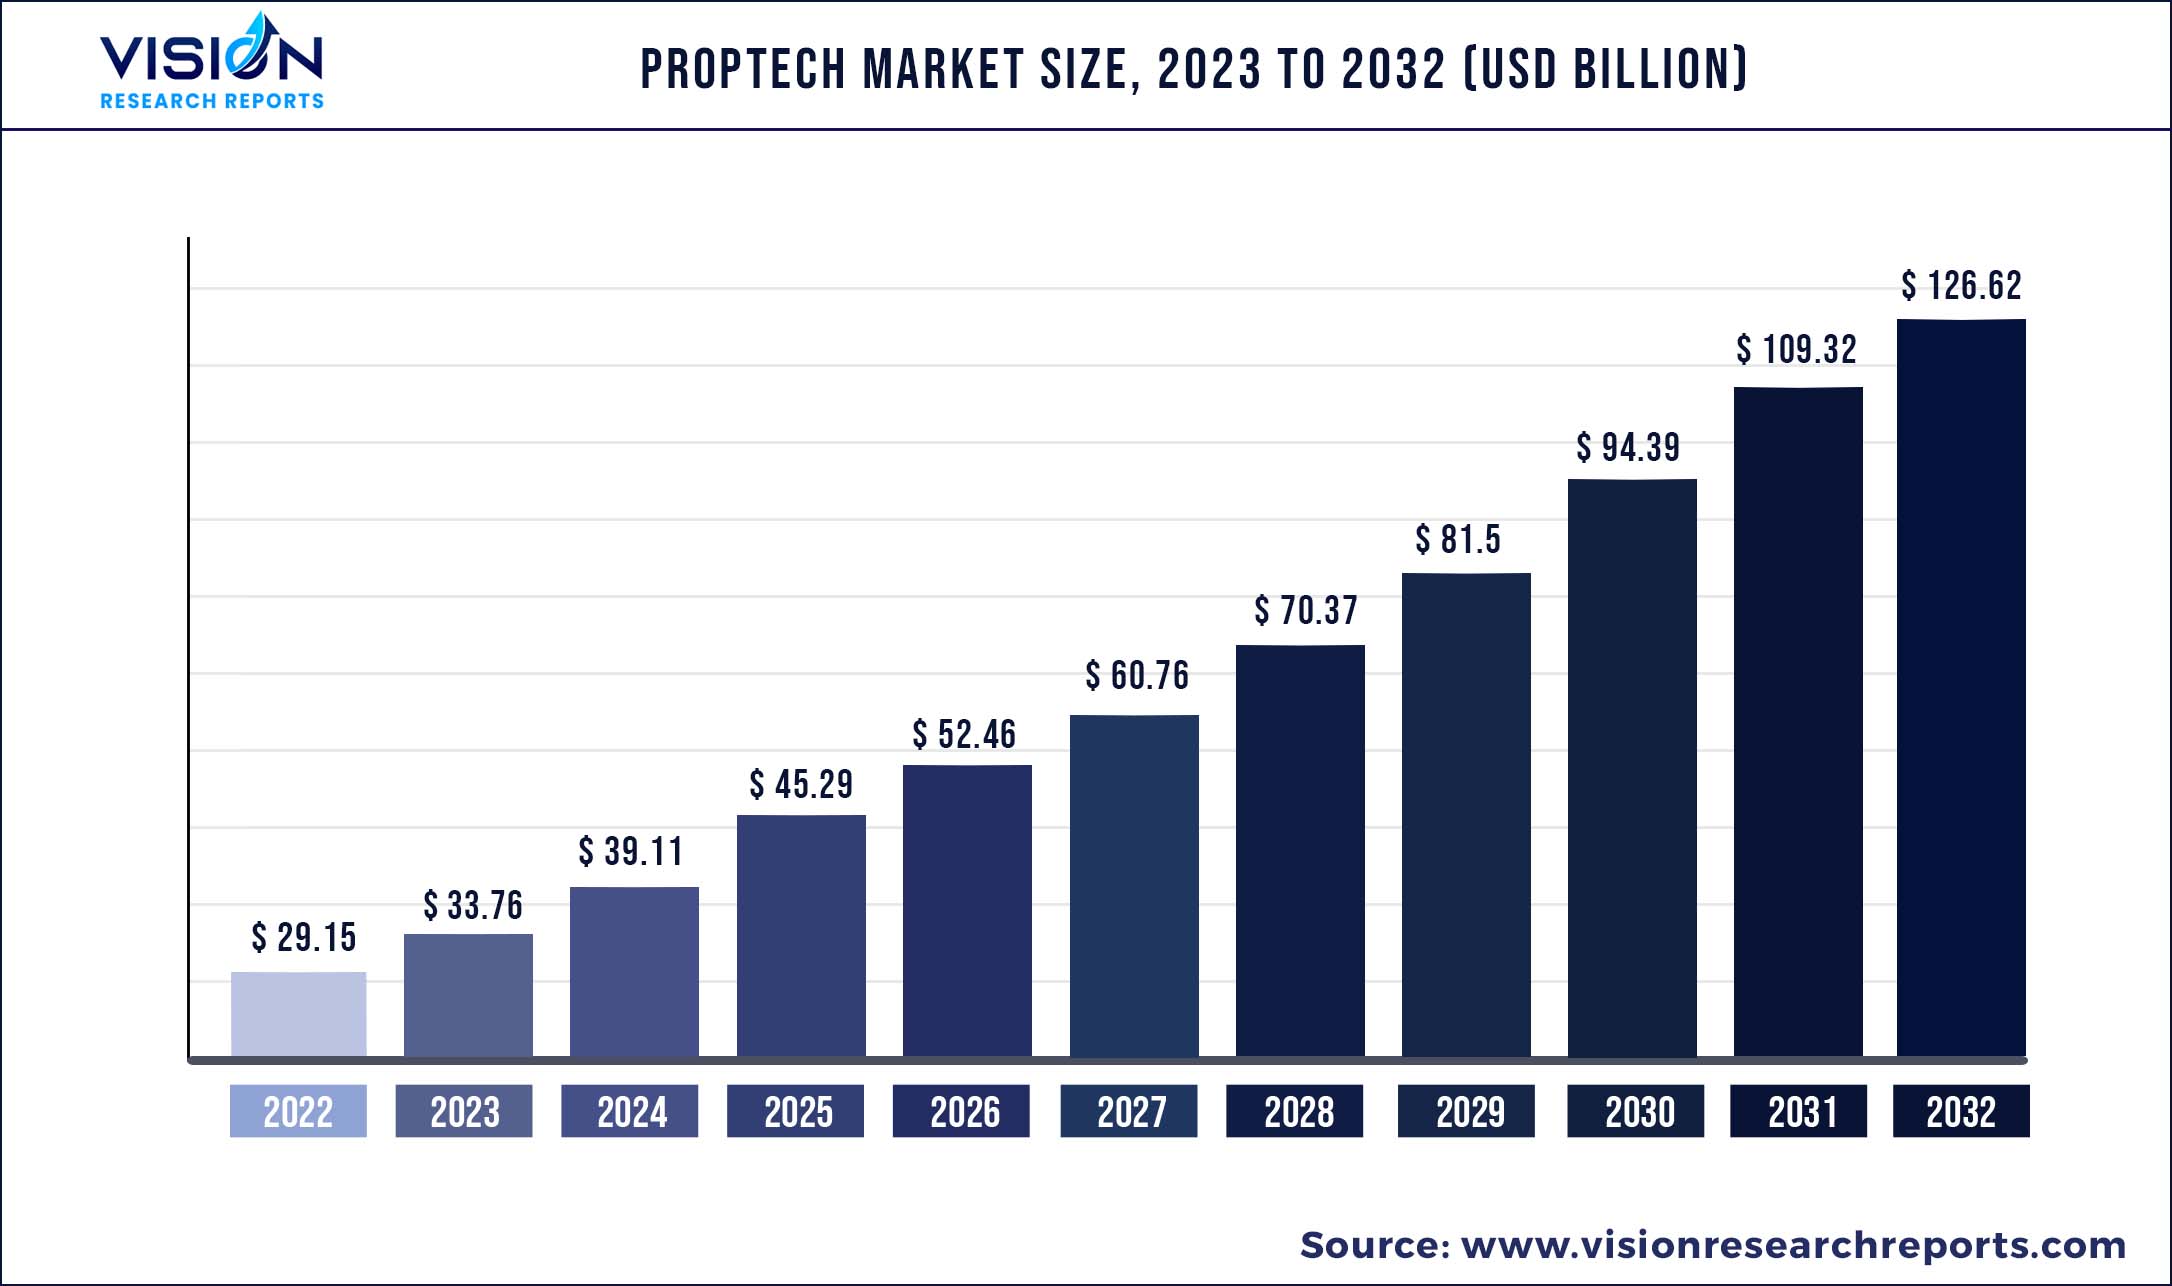 PropTech Market Size 2023 to 2032